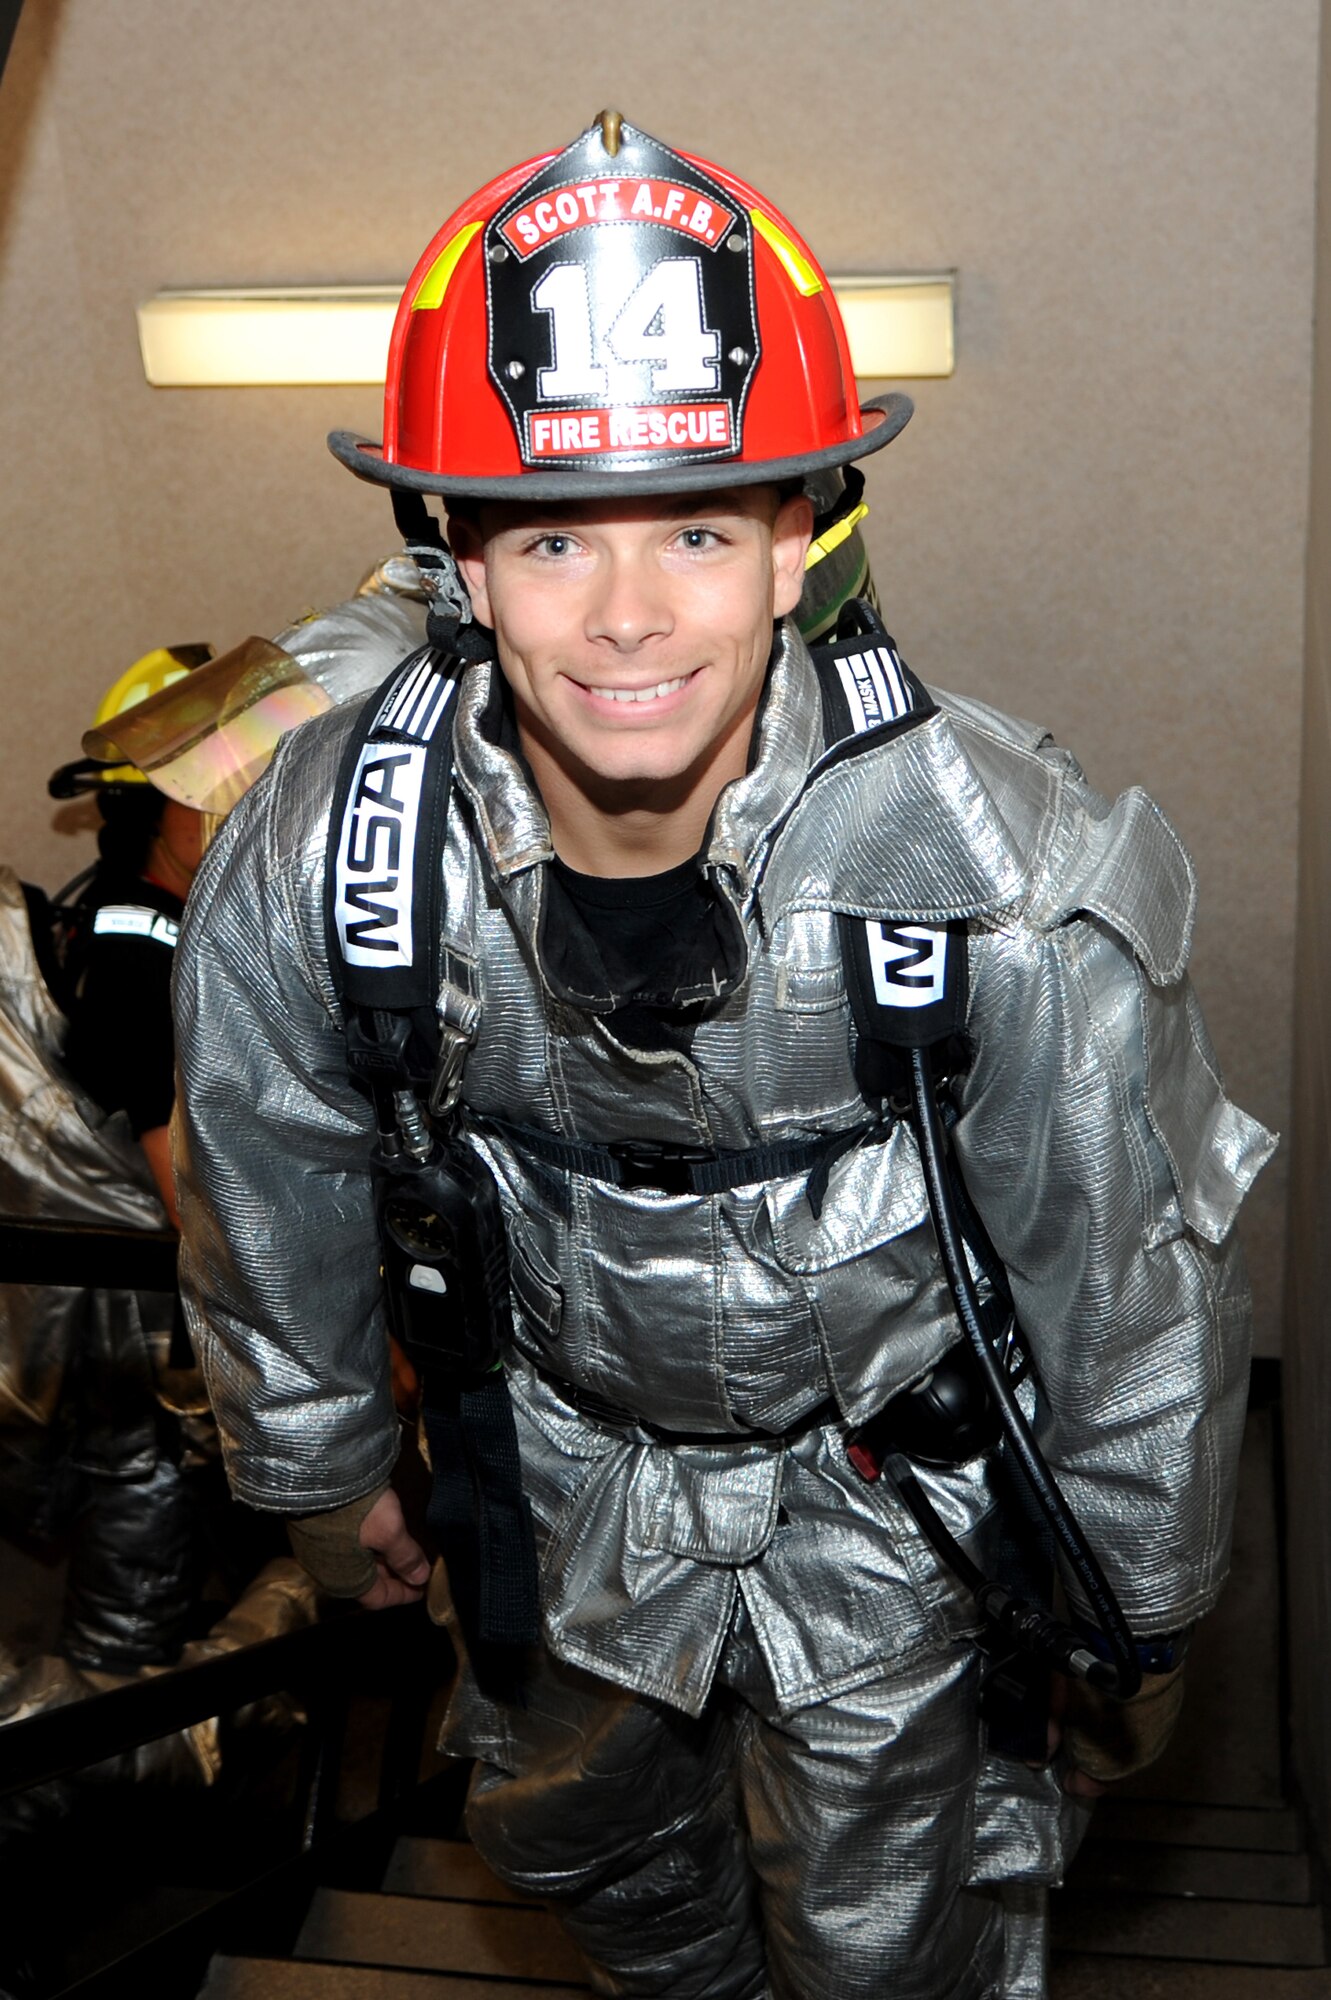 Staff Sgt. Randall Forsythe, a 375th Civil Engineer Squadron Firefighter, participated in a stair climb in Clayton, Mo., Sept. 7, 2014, to honor the fallen firefighters who gave their lives after the attacks on 9/11. Donations were gathered for the run and given toward the Fallen Firefighters Foundation, which not only helps support the families of the firefighters who lost their lives in 9/11, but also any fallen firefighter around the country with funeral costs, supporting their family and anything else they need. (U.S. Air Force photo/Senior Airman Tristin English)